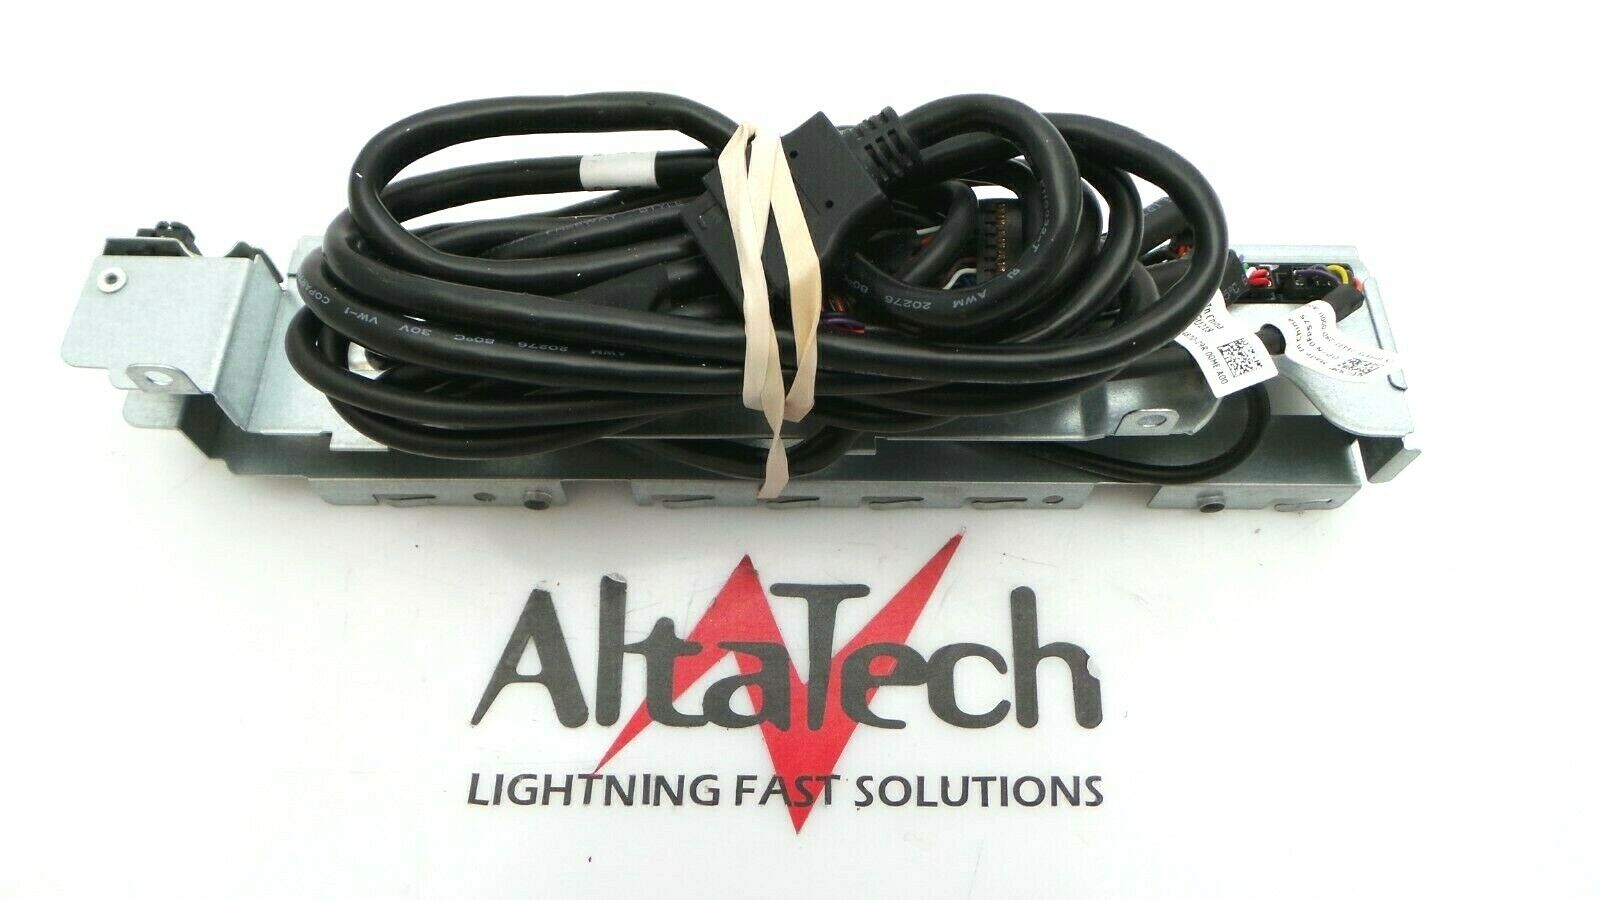 Dell 7W24R Precision T7600 Front I/O USB LED Audio Panel w/ Cables, Used